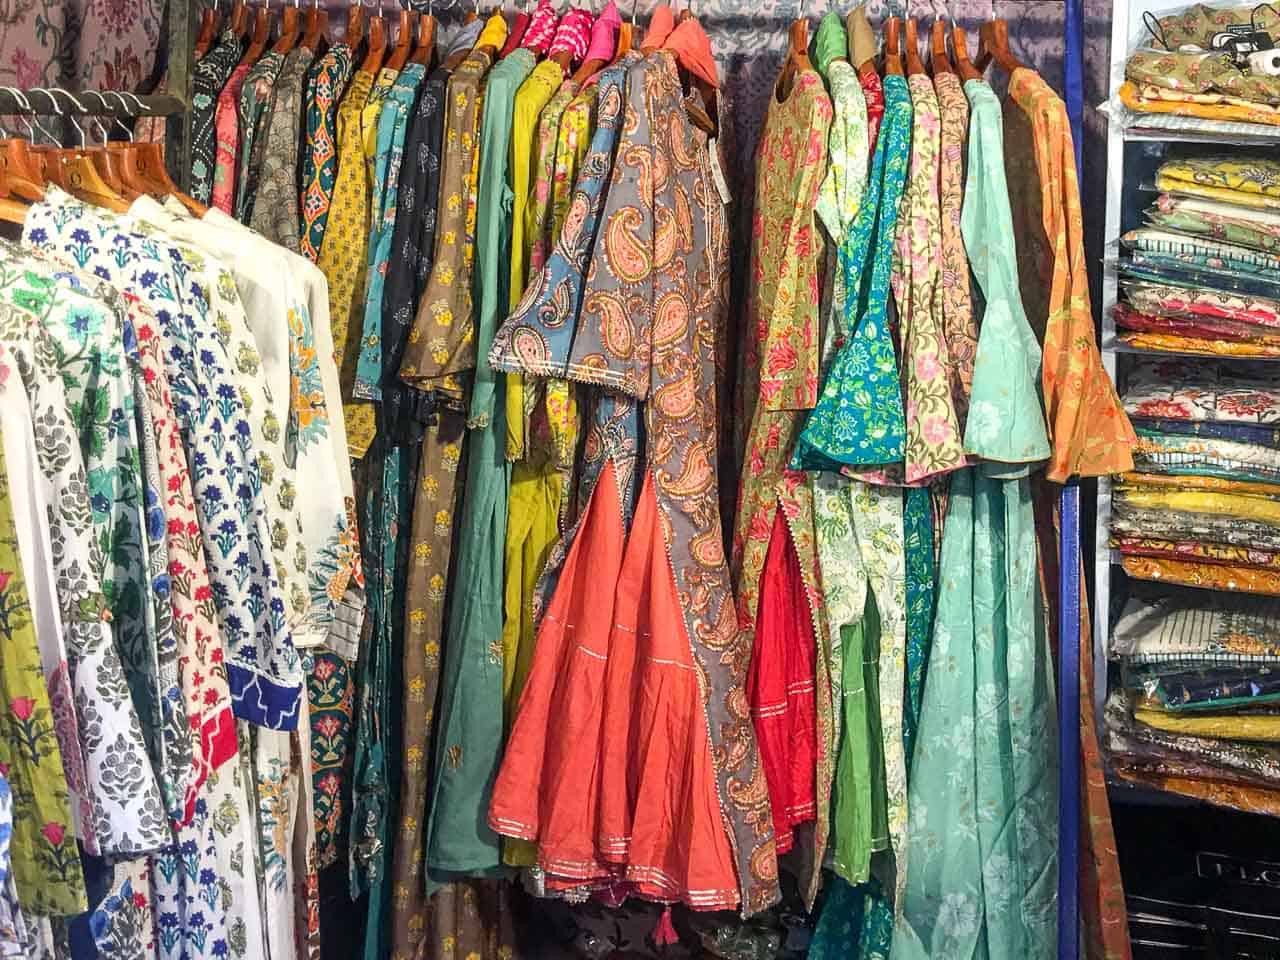 Colourful clothing for sale in a Jaipur bazaar